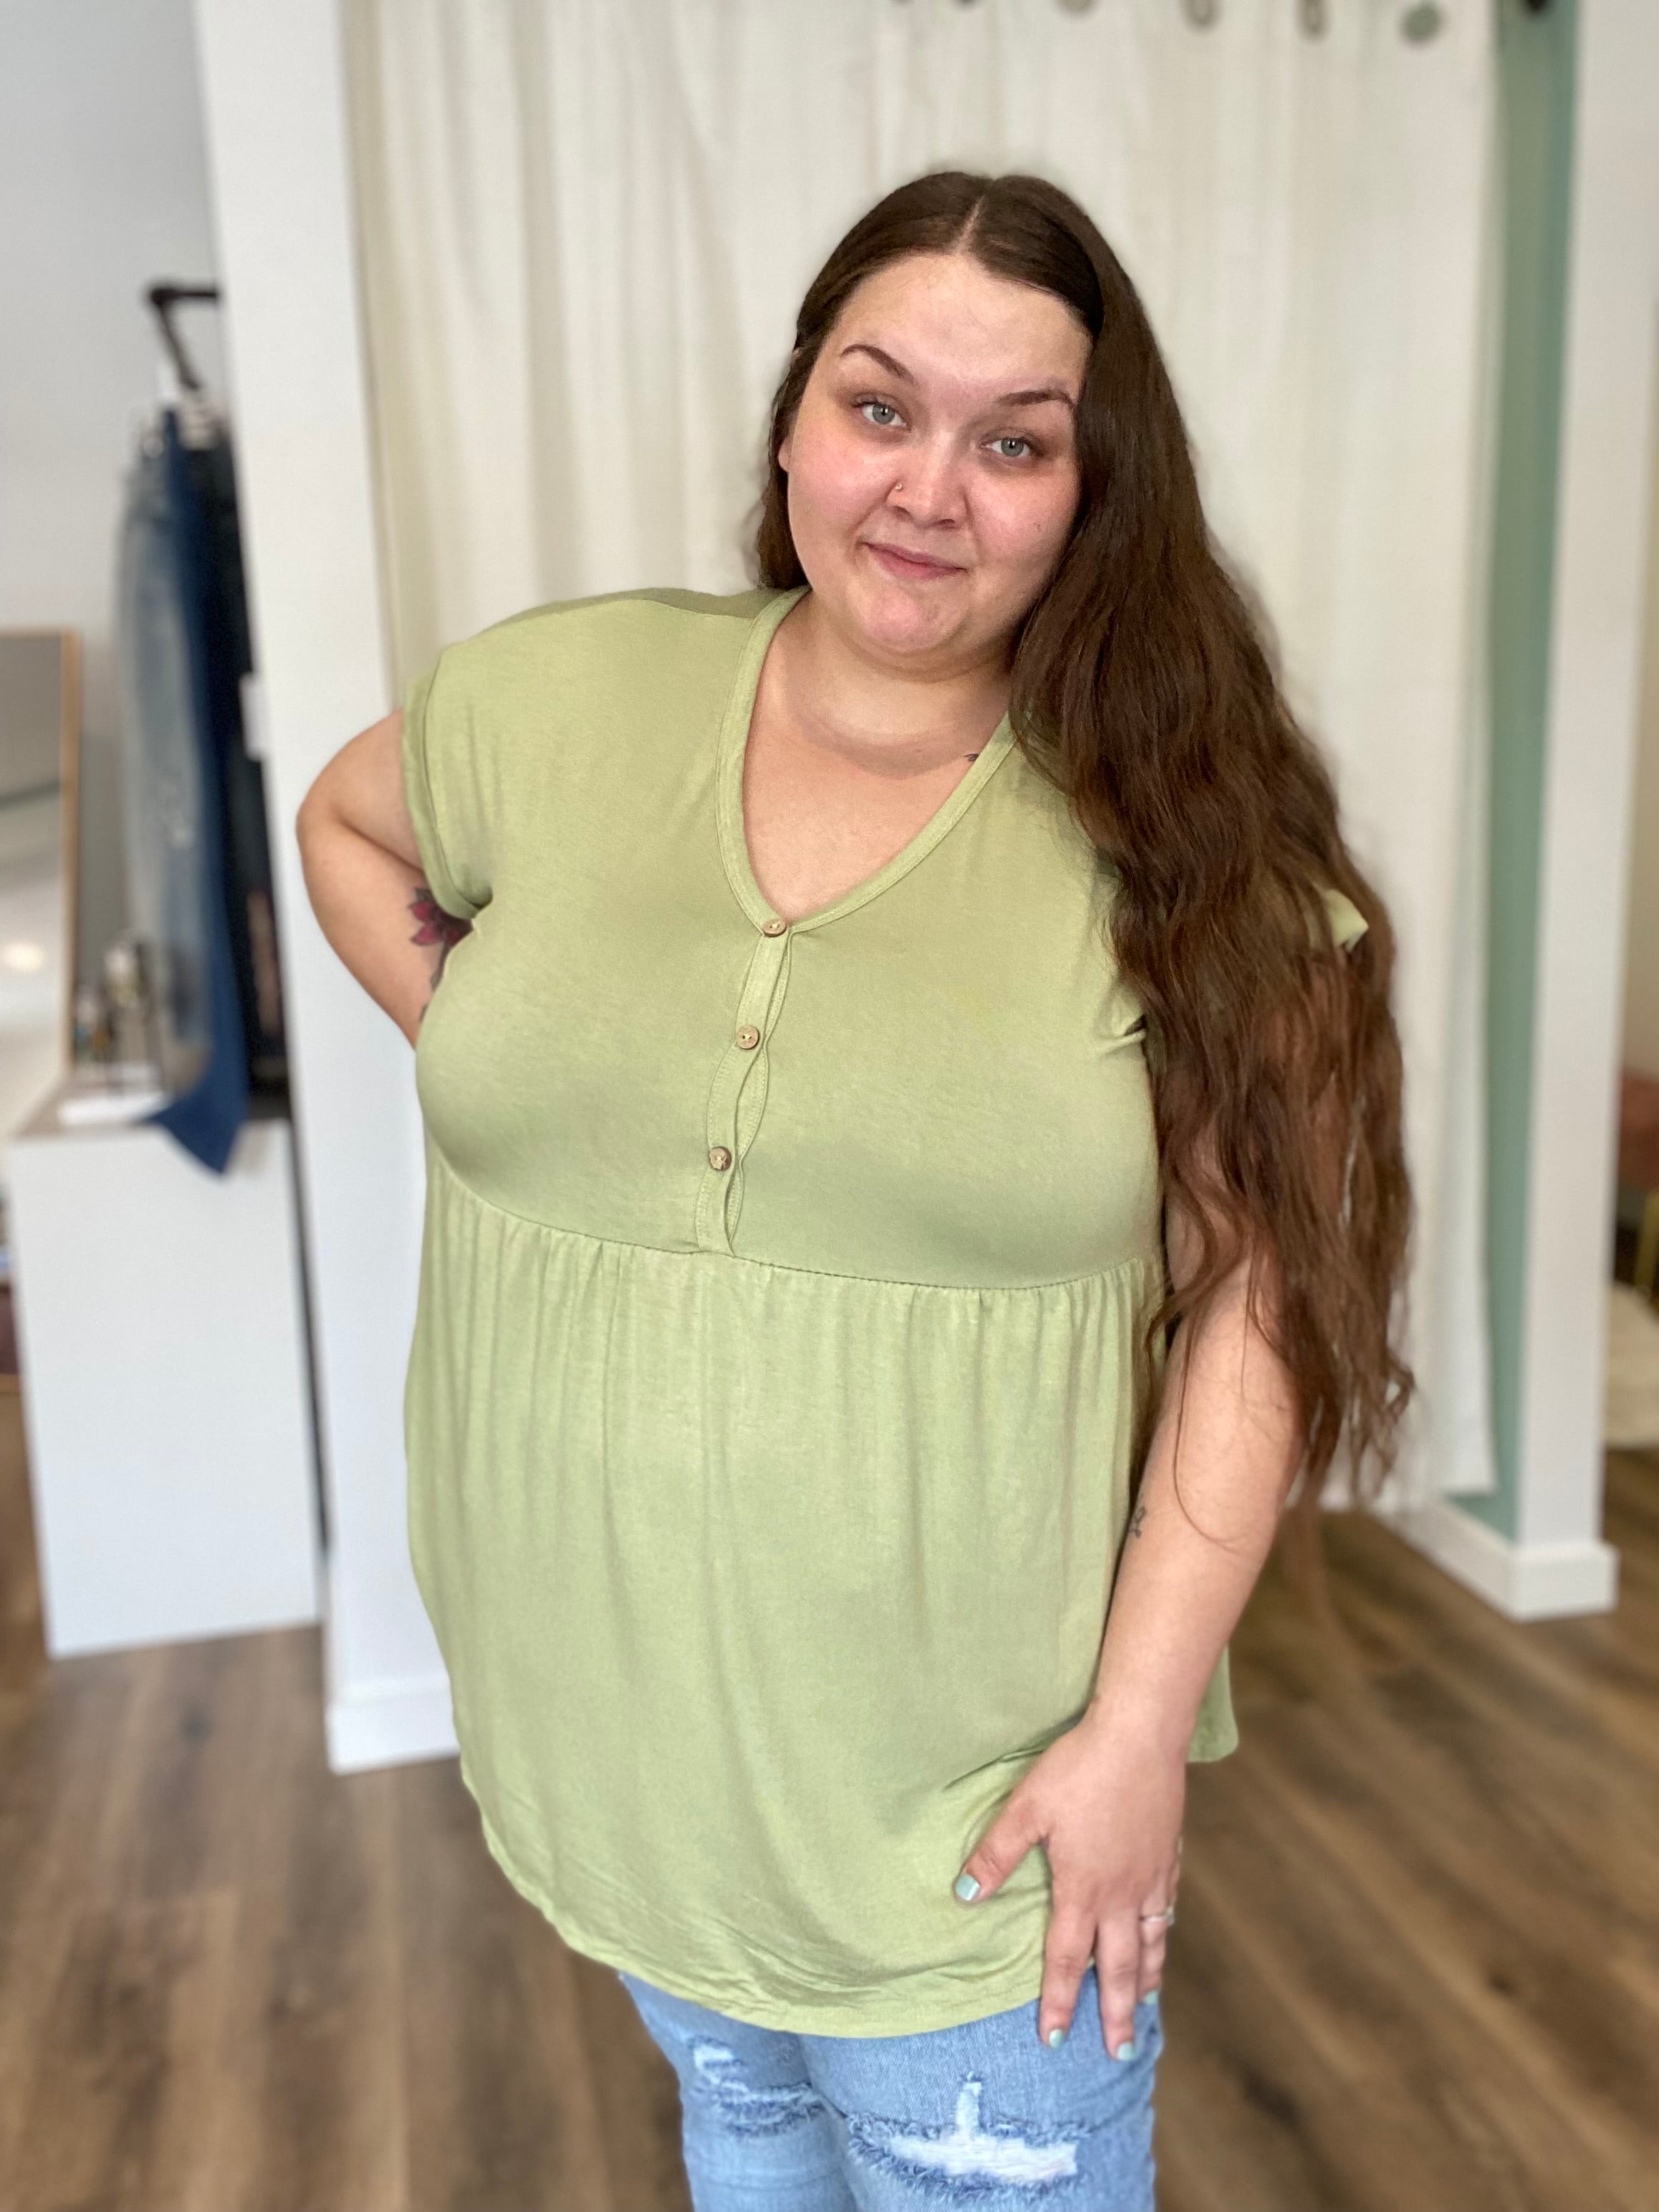 Shop Malia Bamboo Babydoll Top with Buttons - Spring Green-Shirts & Tops at Ruby Joy Boutique, a Women's Clothing Store in Pickerington, Ohio